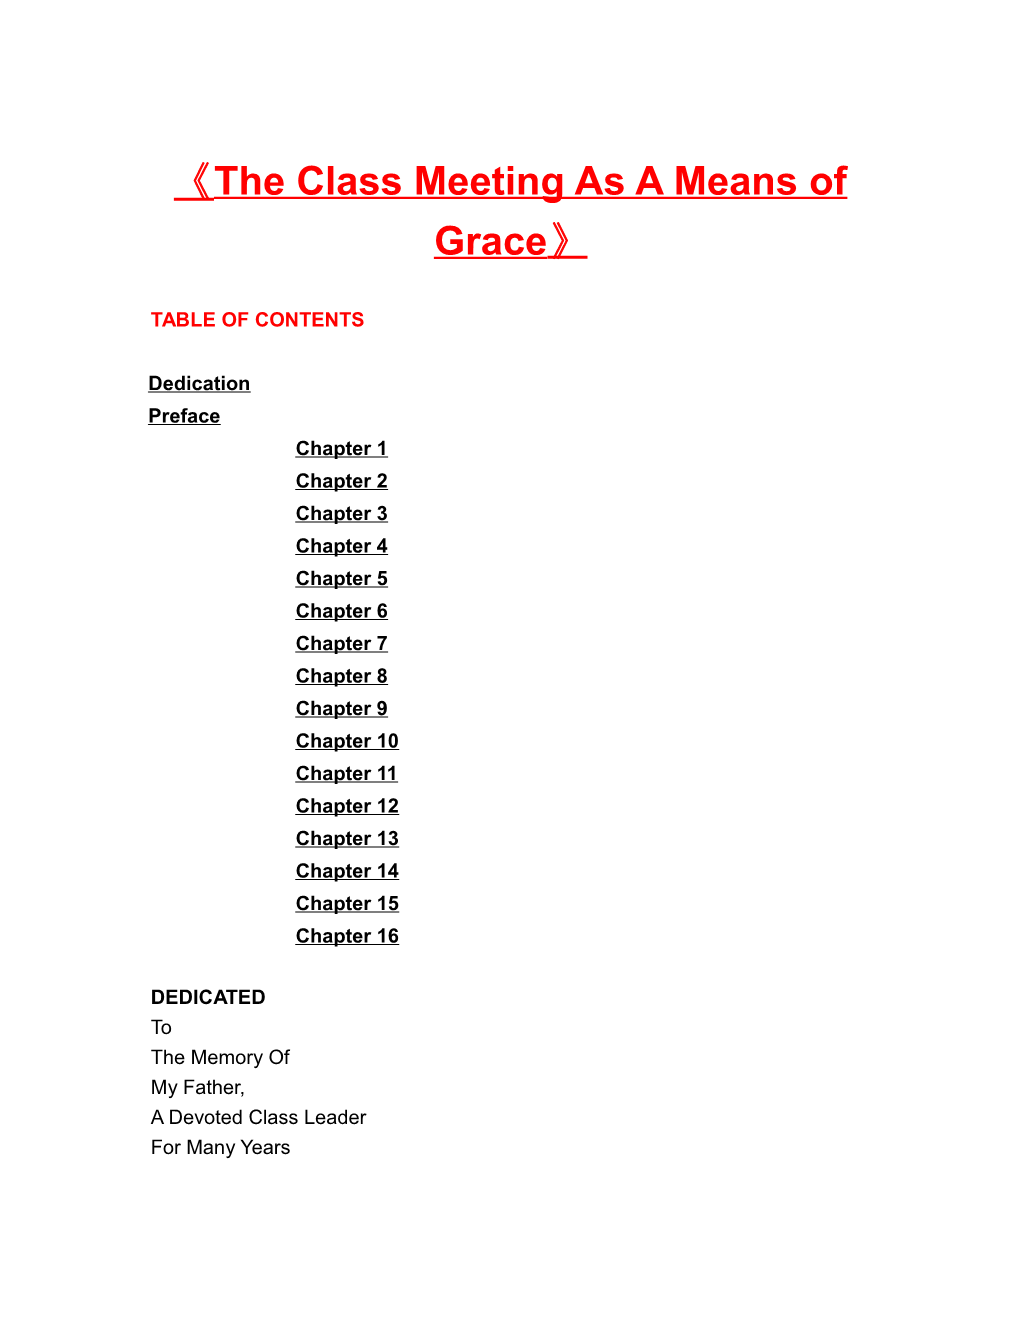 The Class Meeting As a Means of Grace